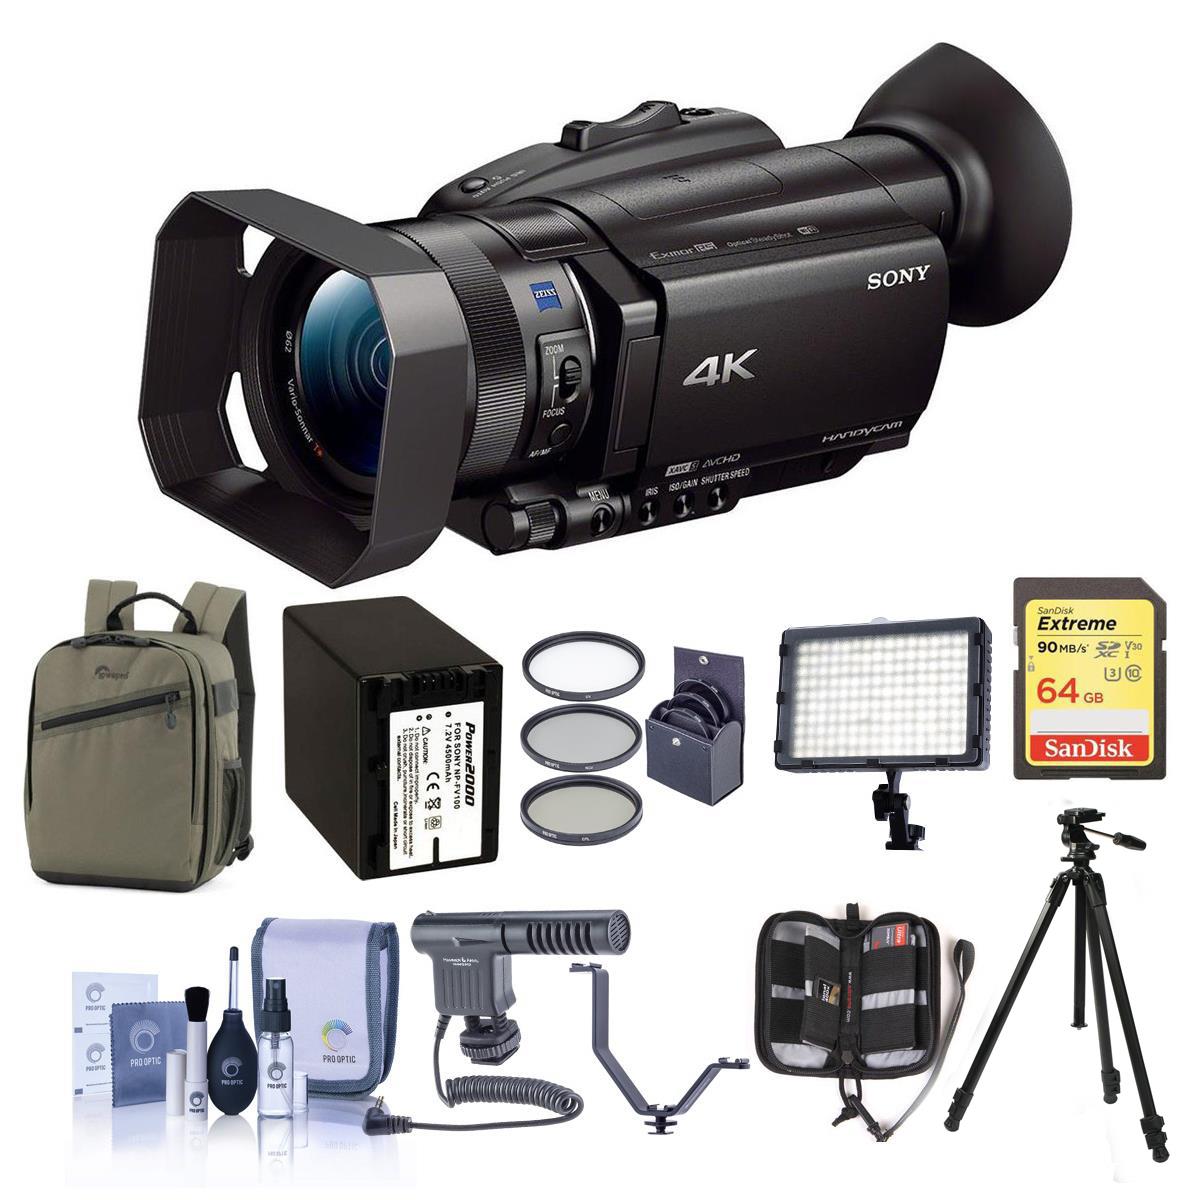 

Sony FDR-AX700 4K Handycam Camcorder with 1" Sensor And Premium Accessory Bundle